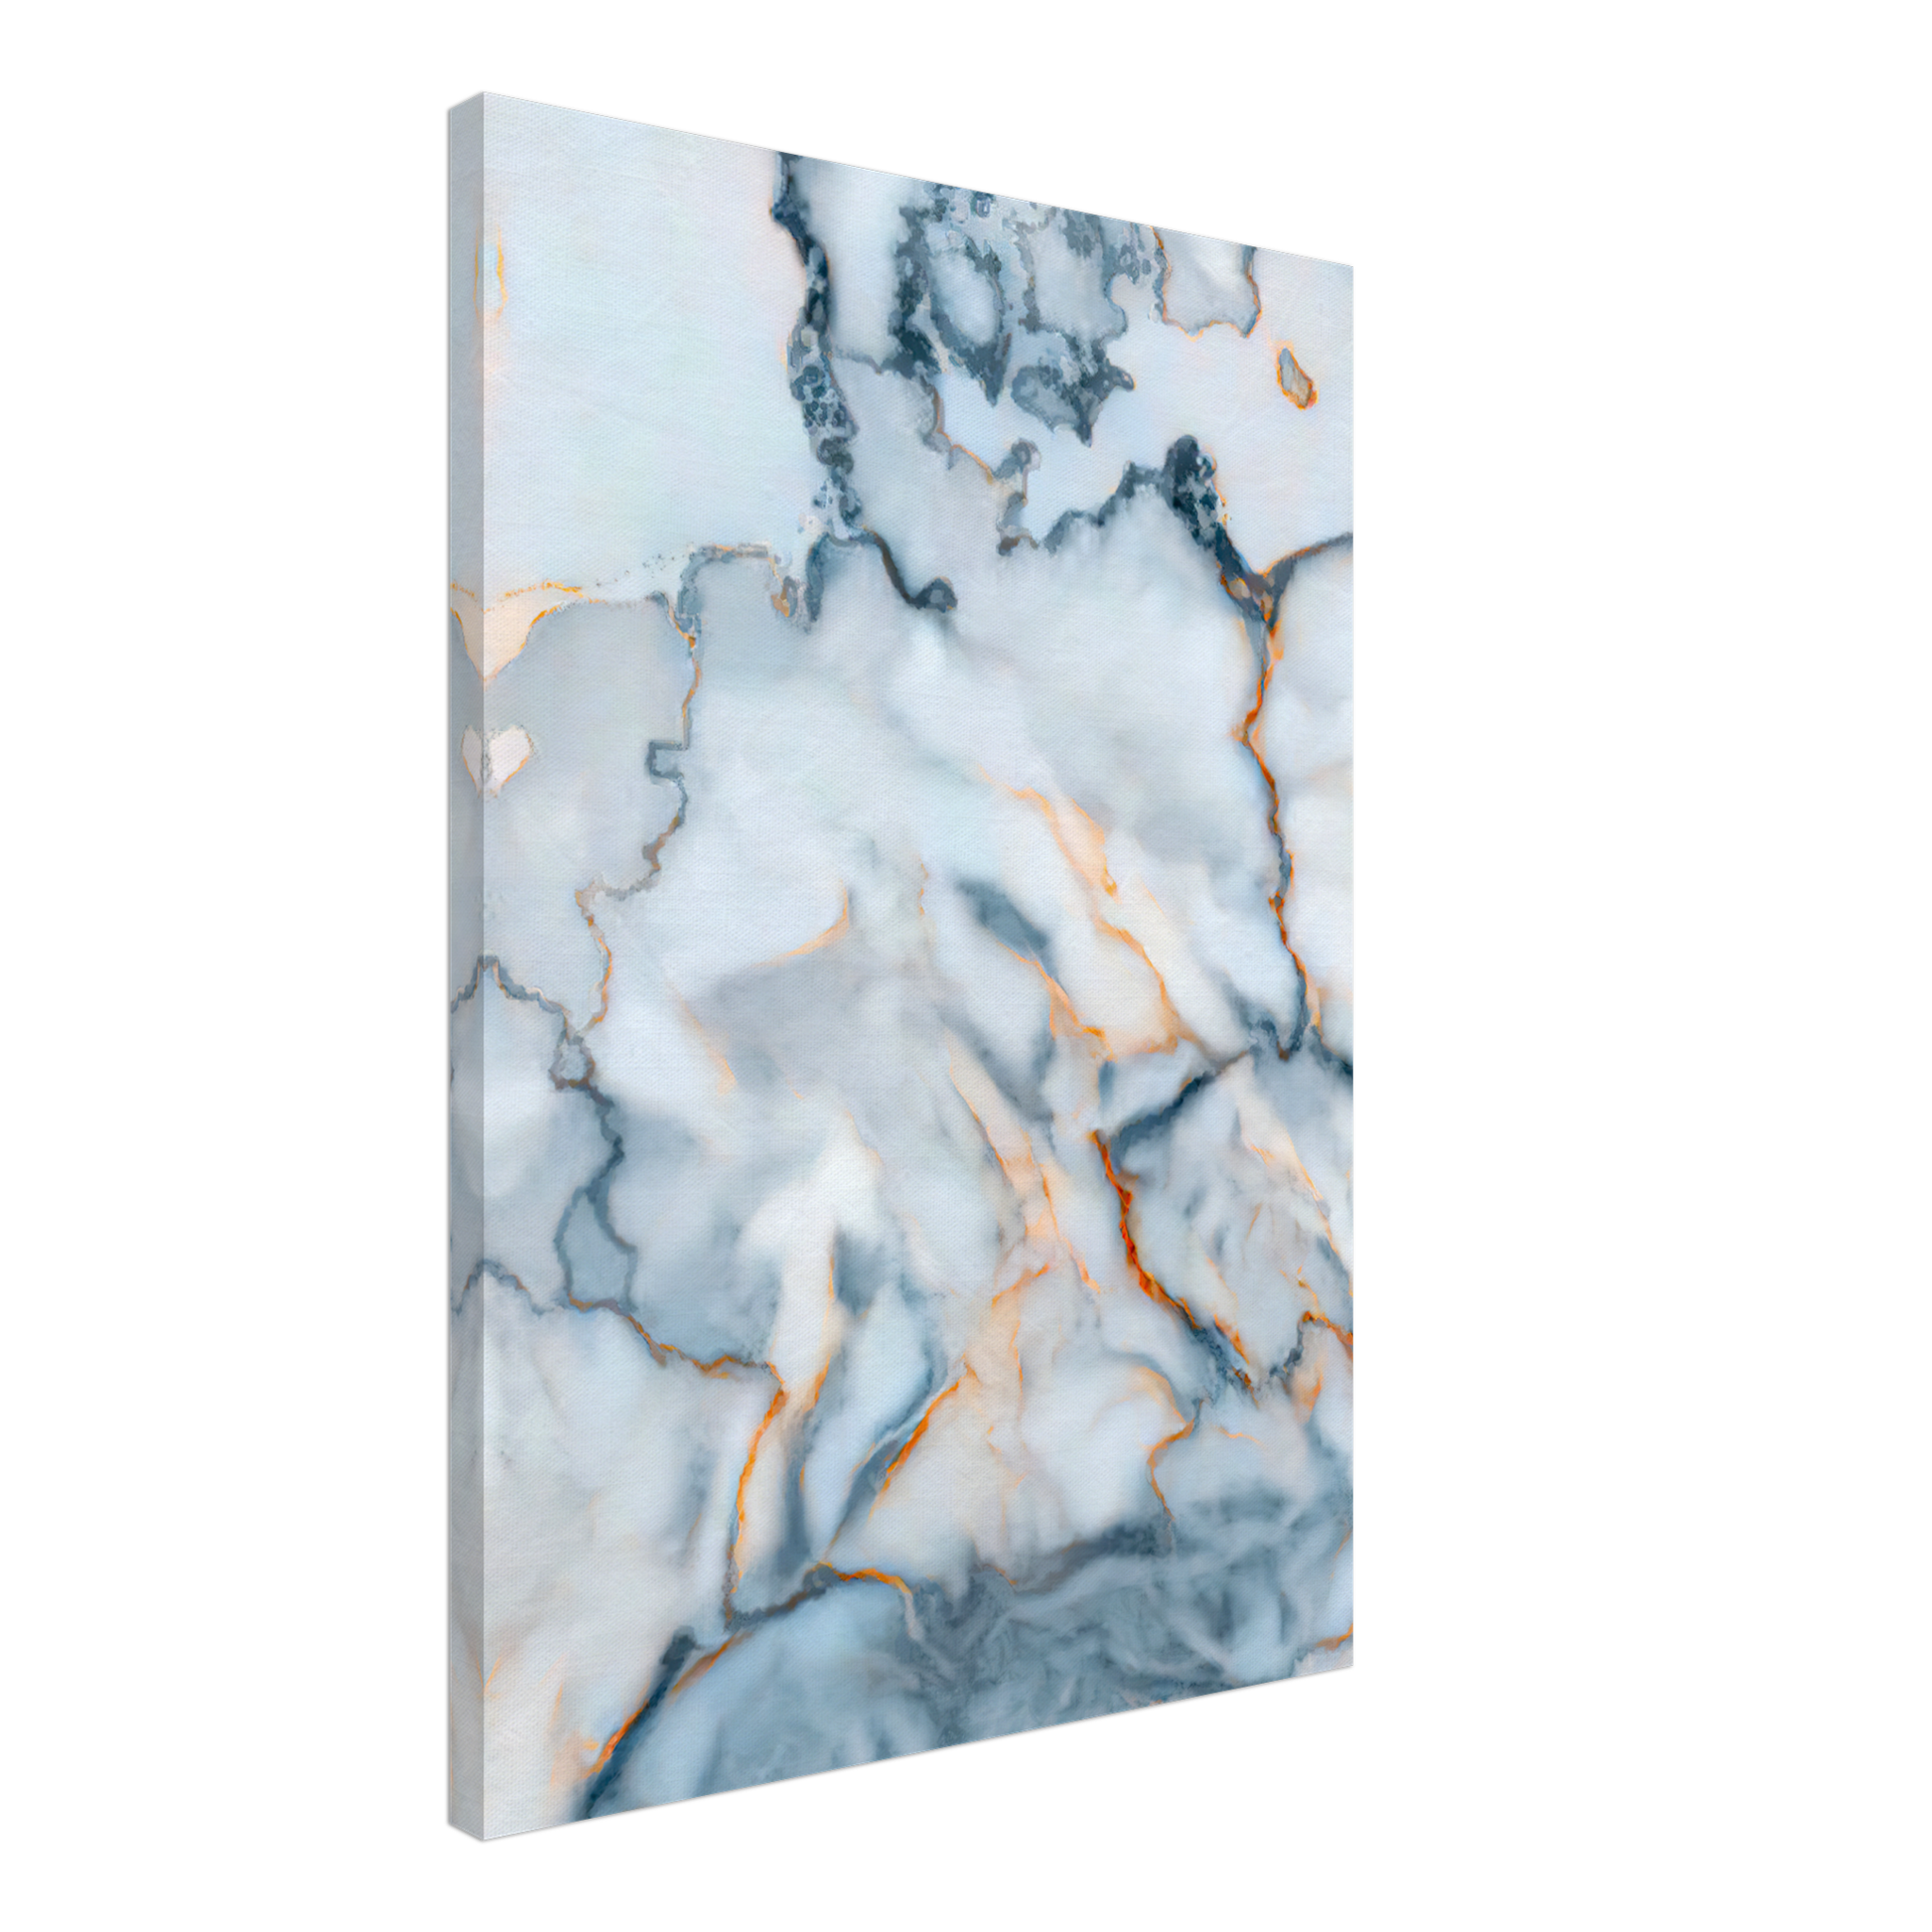 Germany Marble Map Canvas